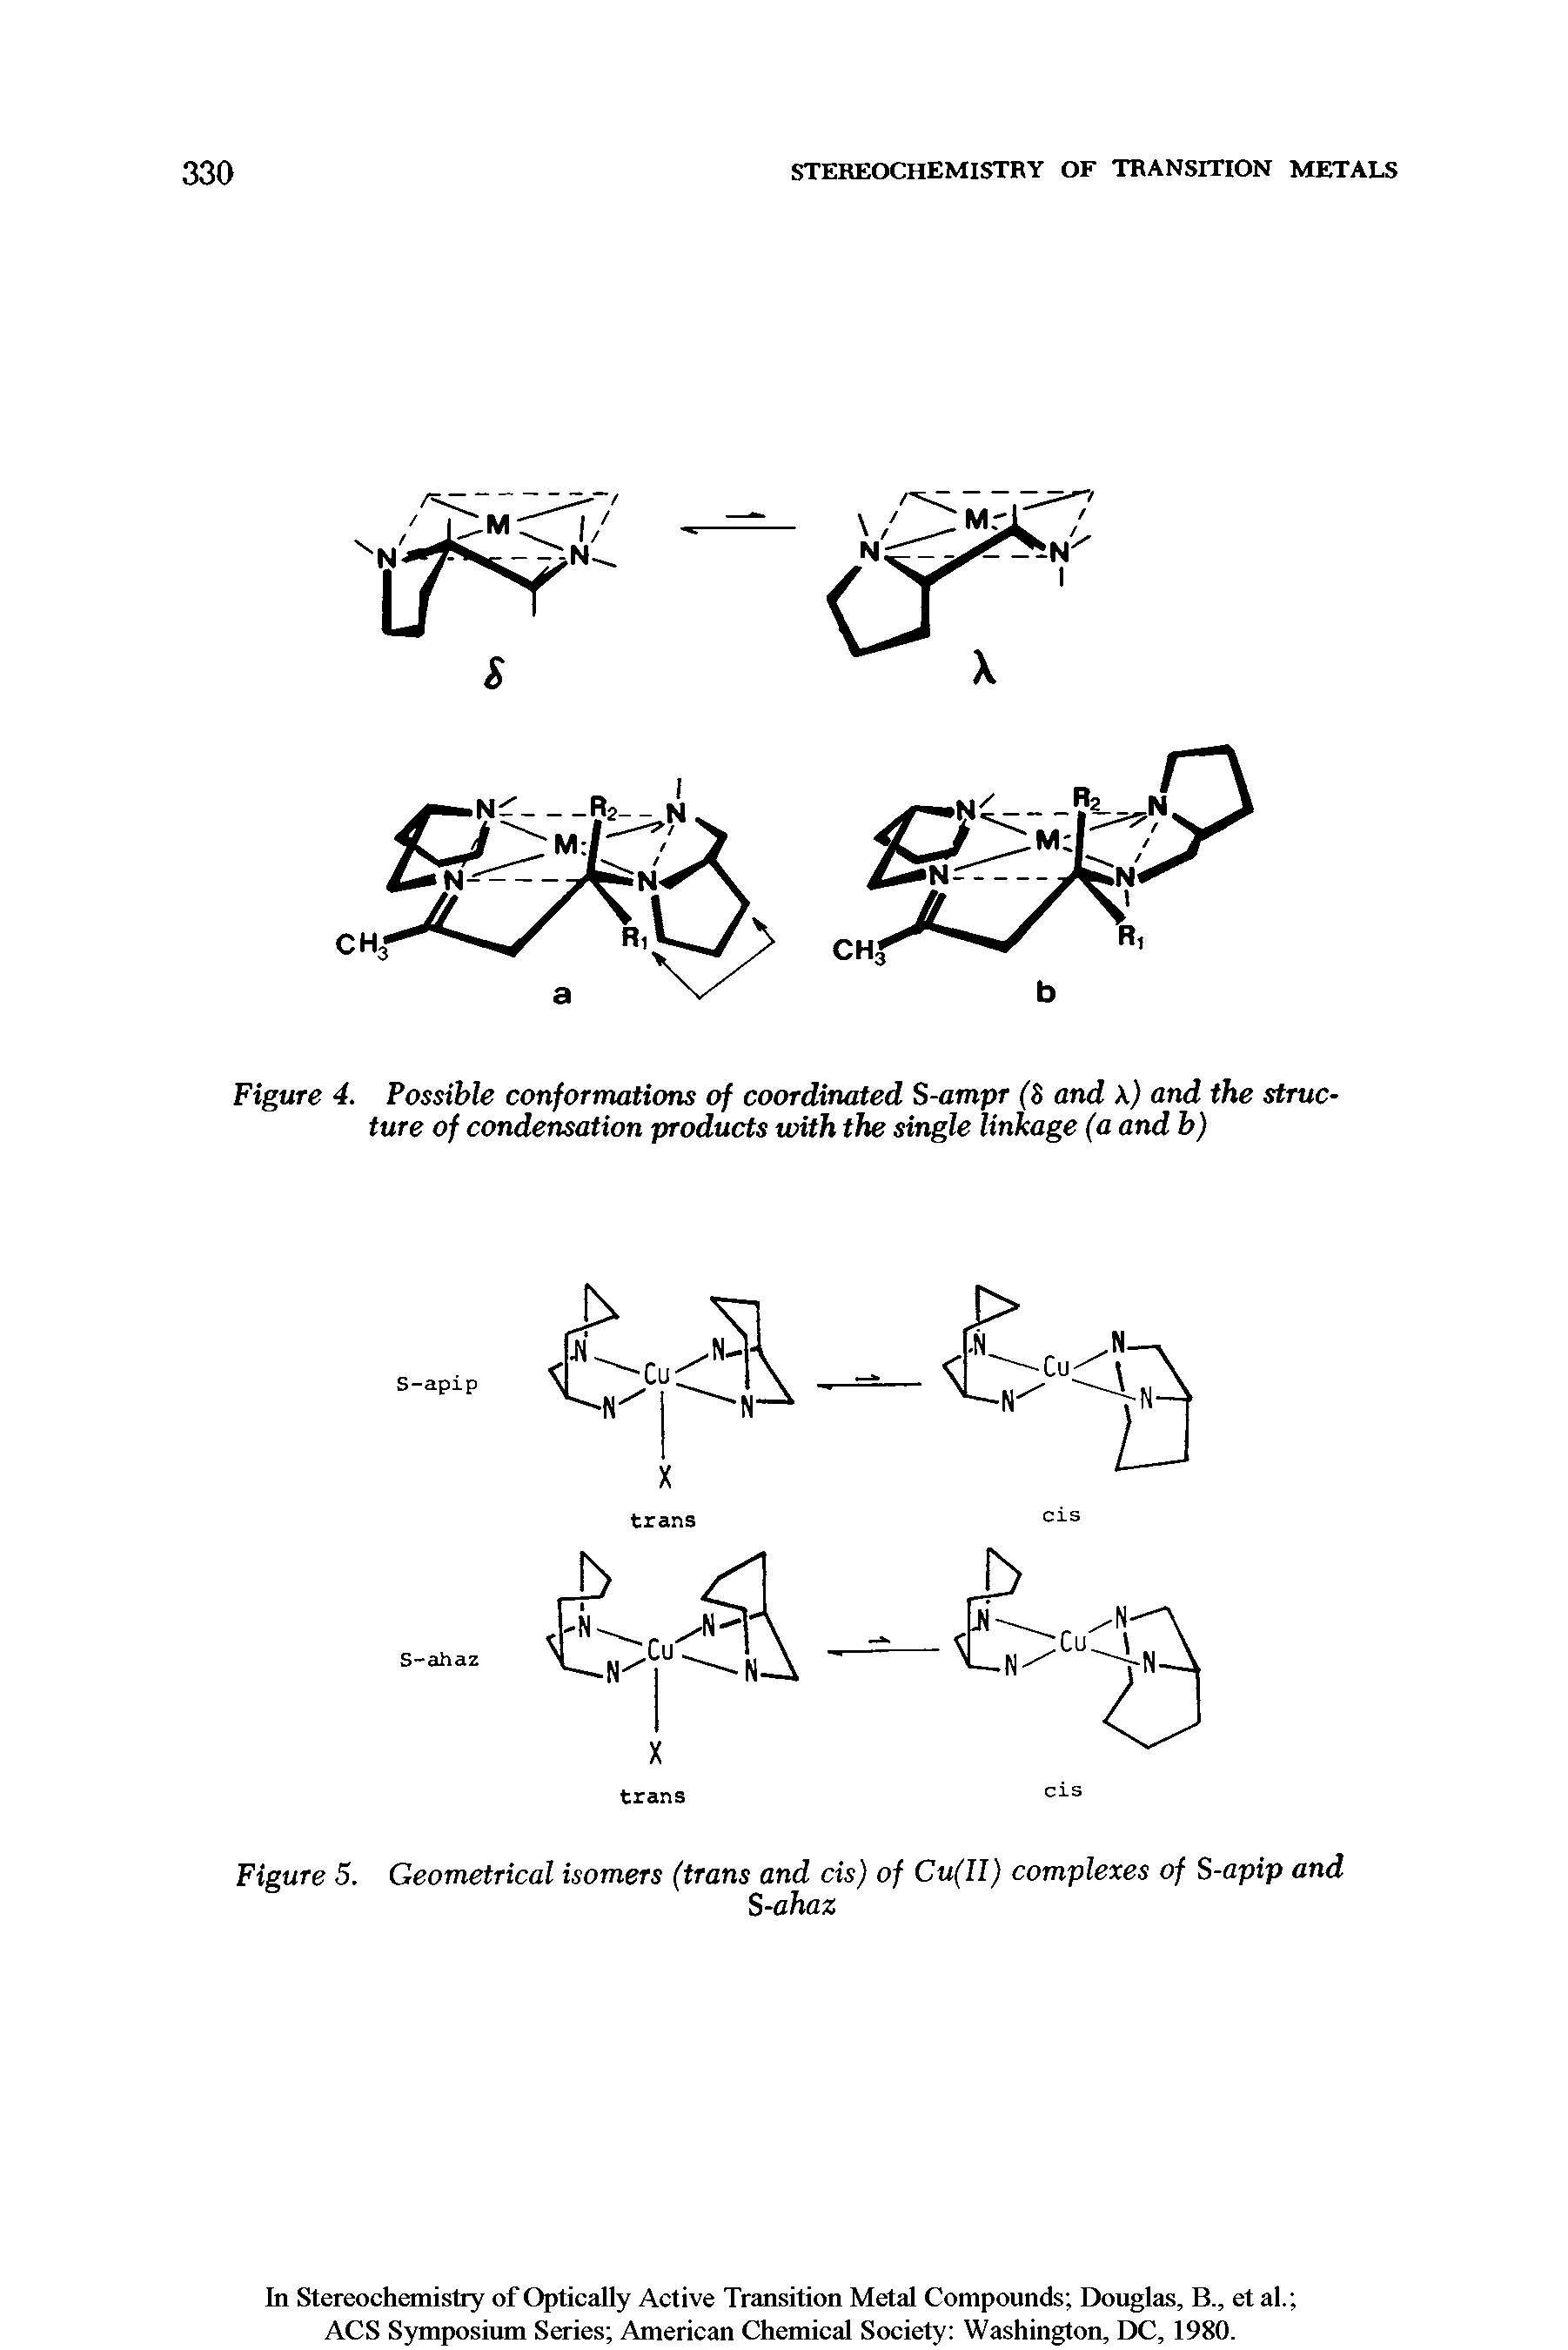 Figure 4. Possible conformations of coordinated S-ampr (8 and ) and the structure of condensation products with the single linkage (a and b)...